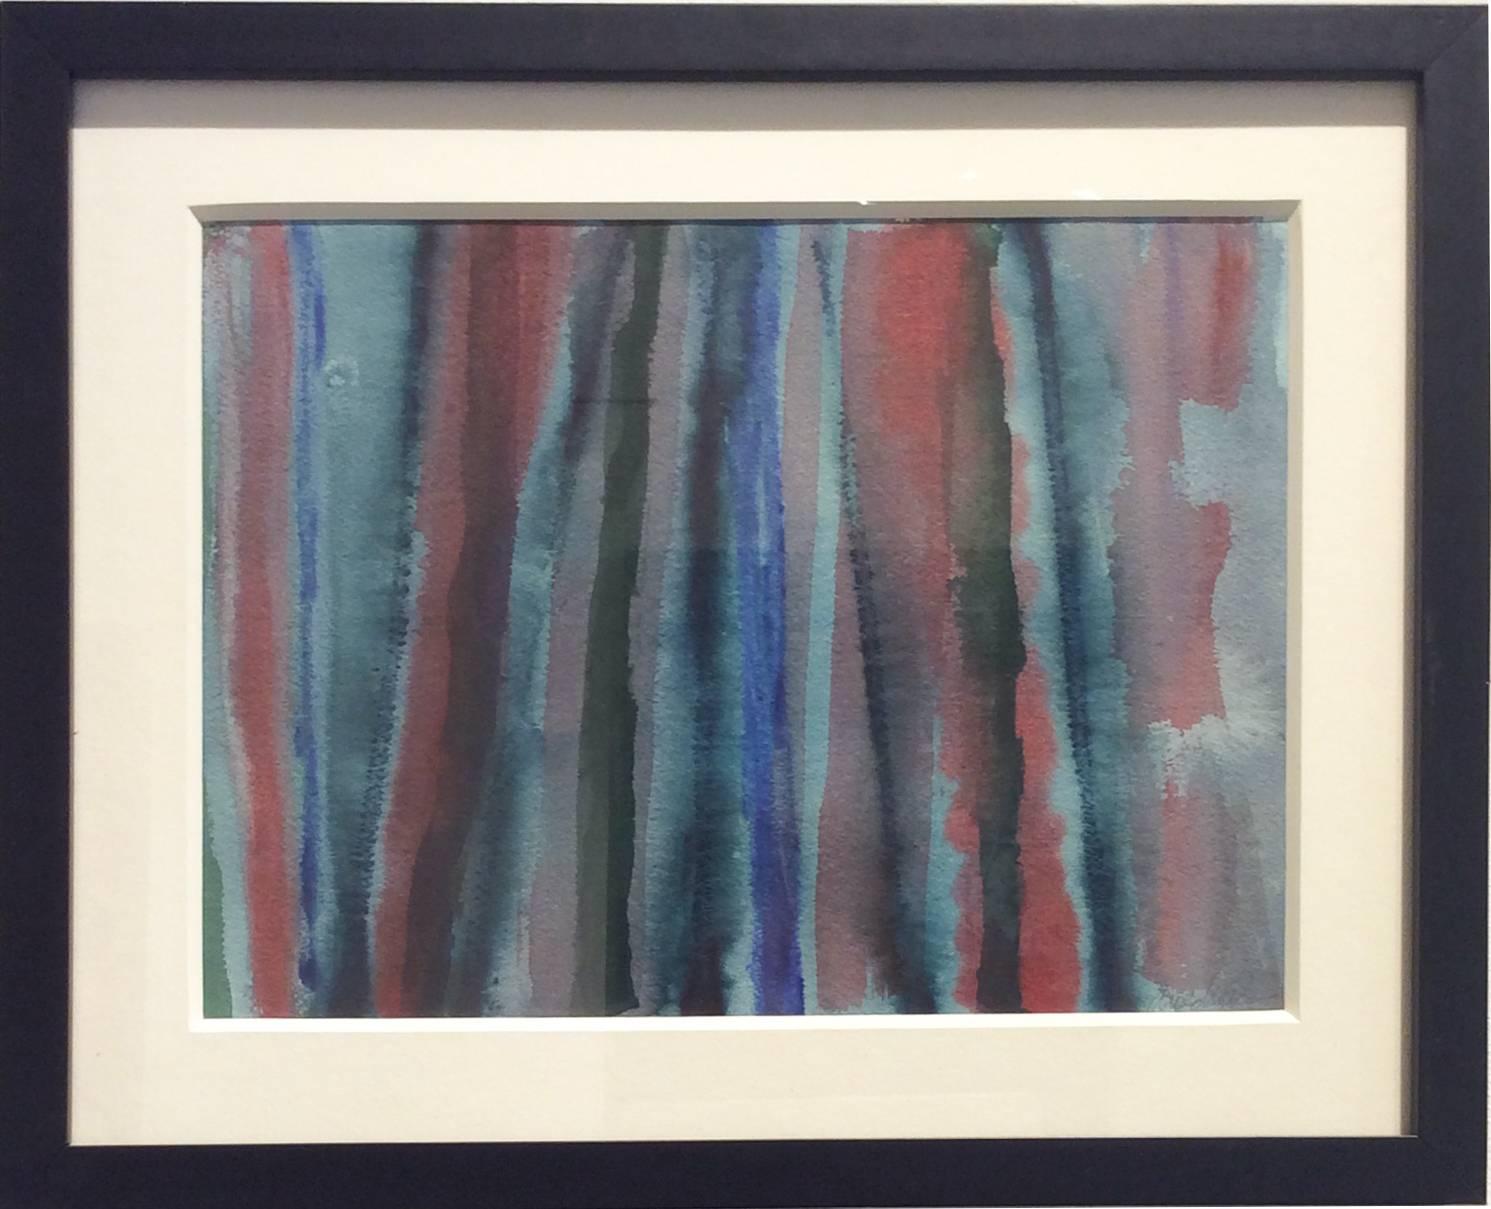 Untitled 239 (1970s Cool Blue Stripe Abstract Watercolor Painting) - Art by Edward Avedisian